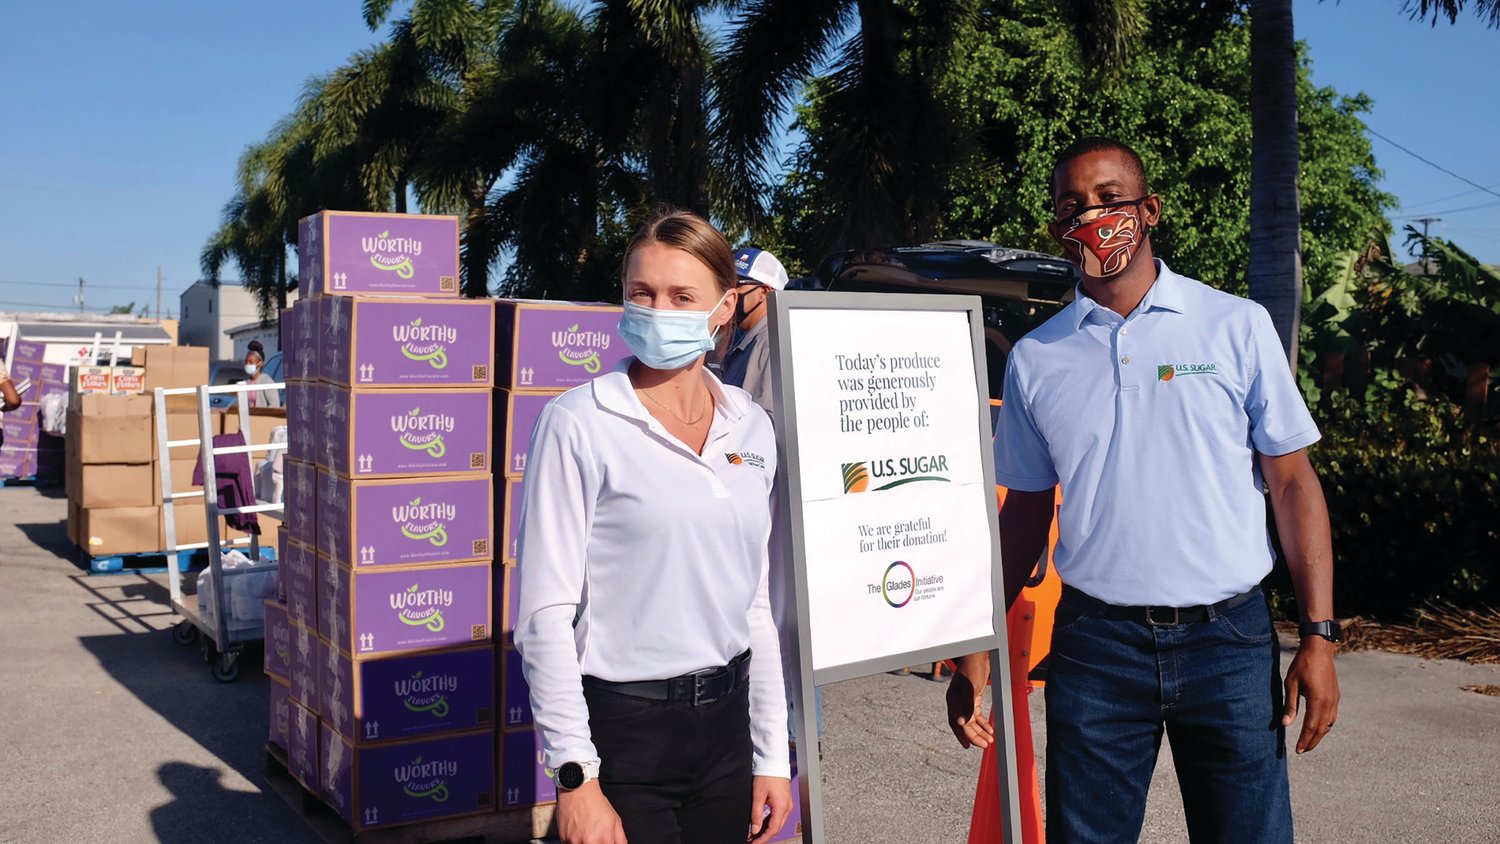 Communications Coordinator Payton Pierce and Community Relations Manager Brannan Thomas were on-hand to help with The Glades Initiative’s weekly food distribution in Belle Glade.